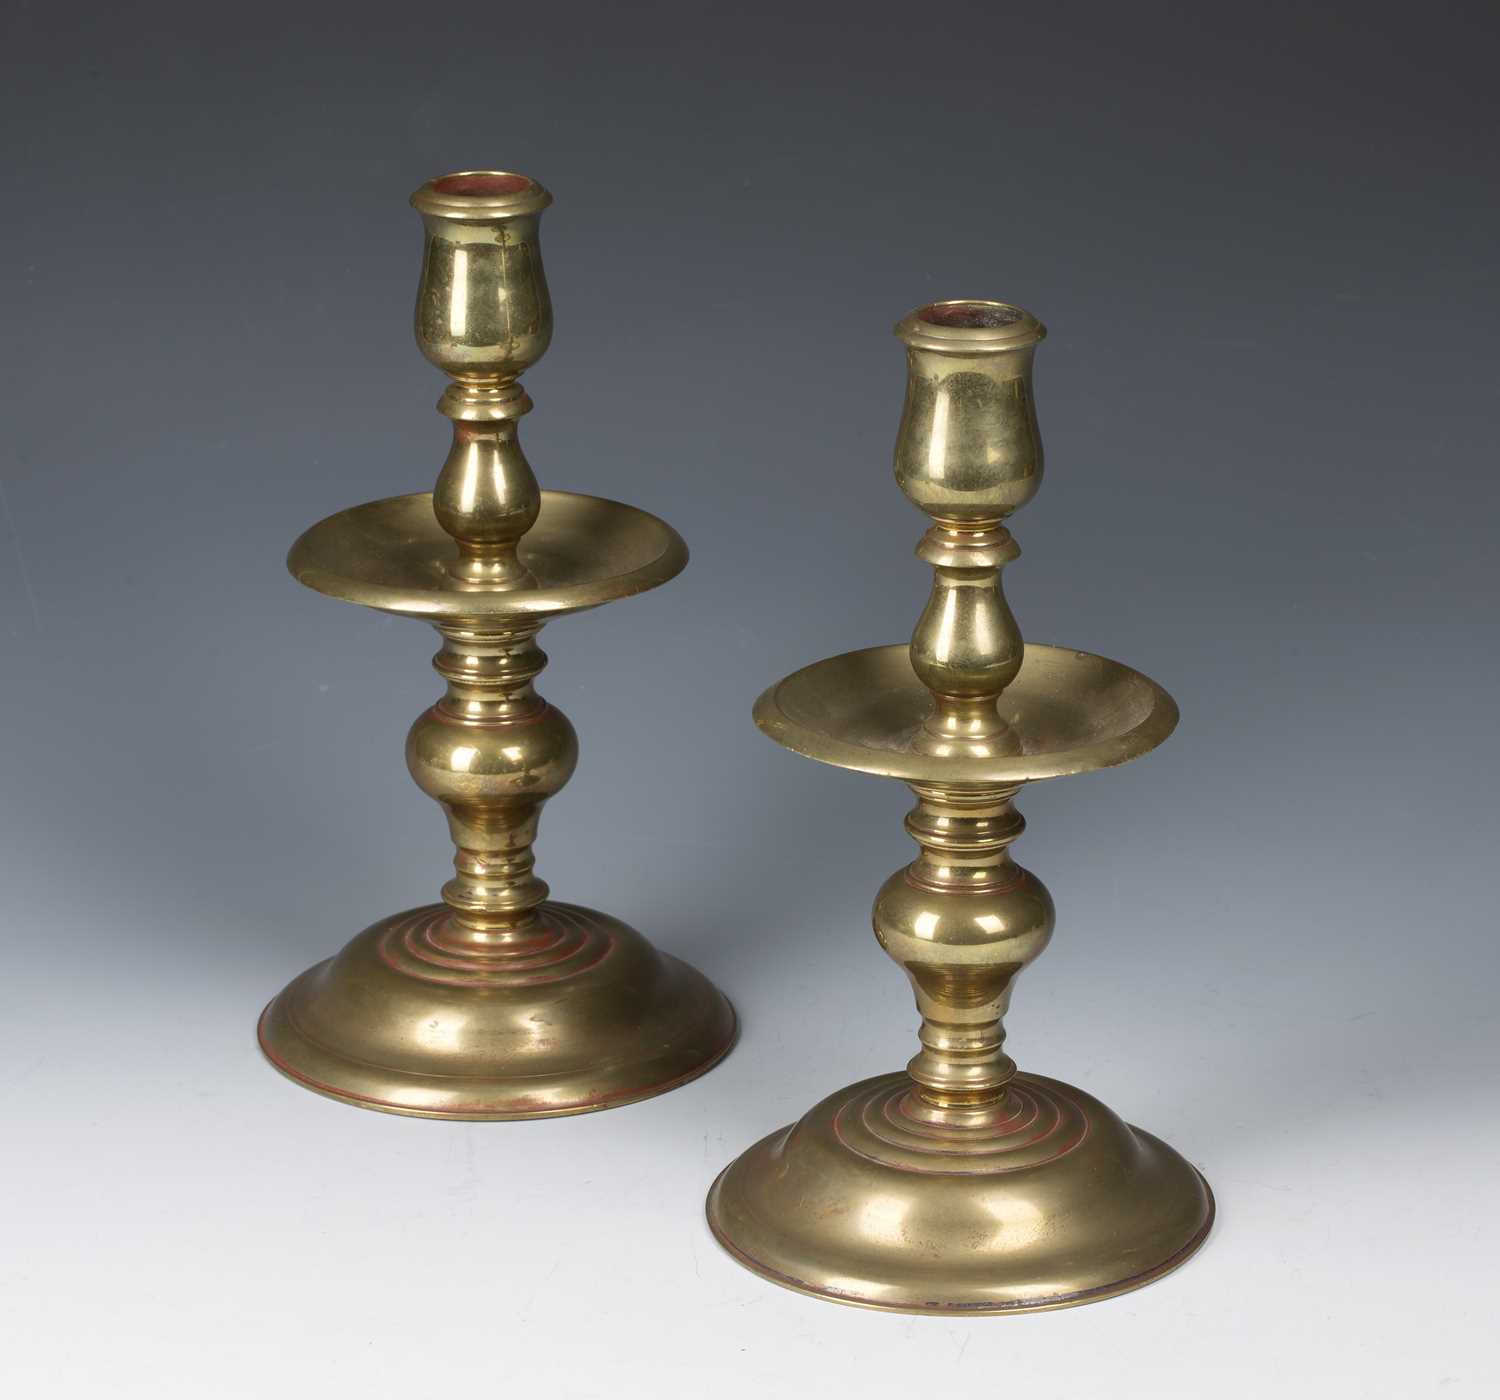 Pair of brass candlesticks with wide circular drip trays on knopped stems, terminating in socle - Image 2 of 2